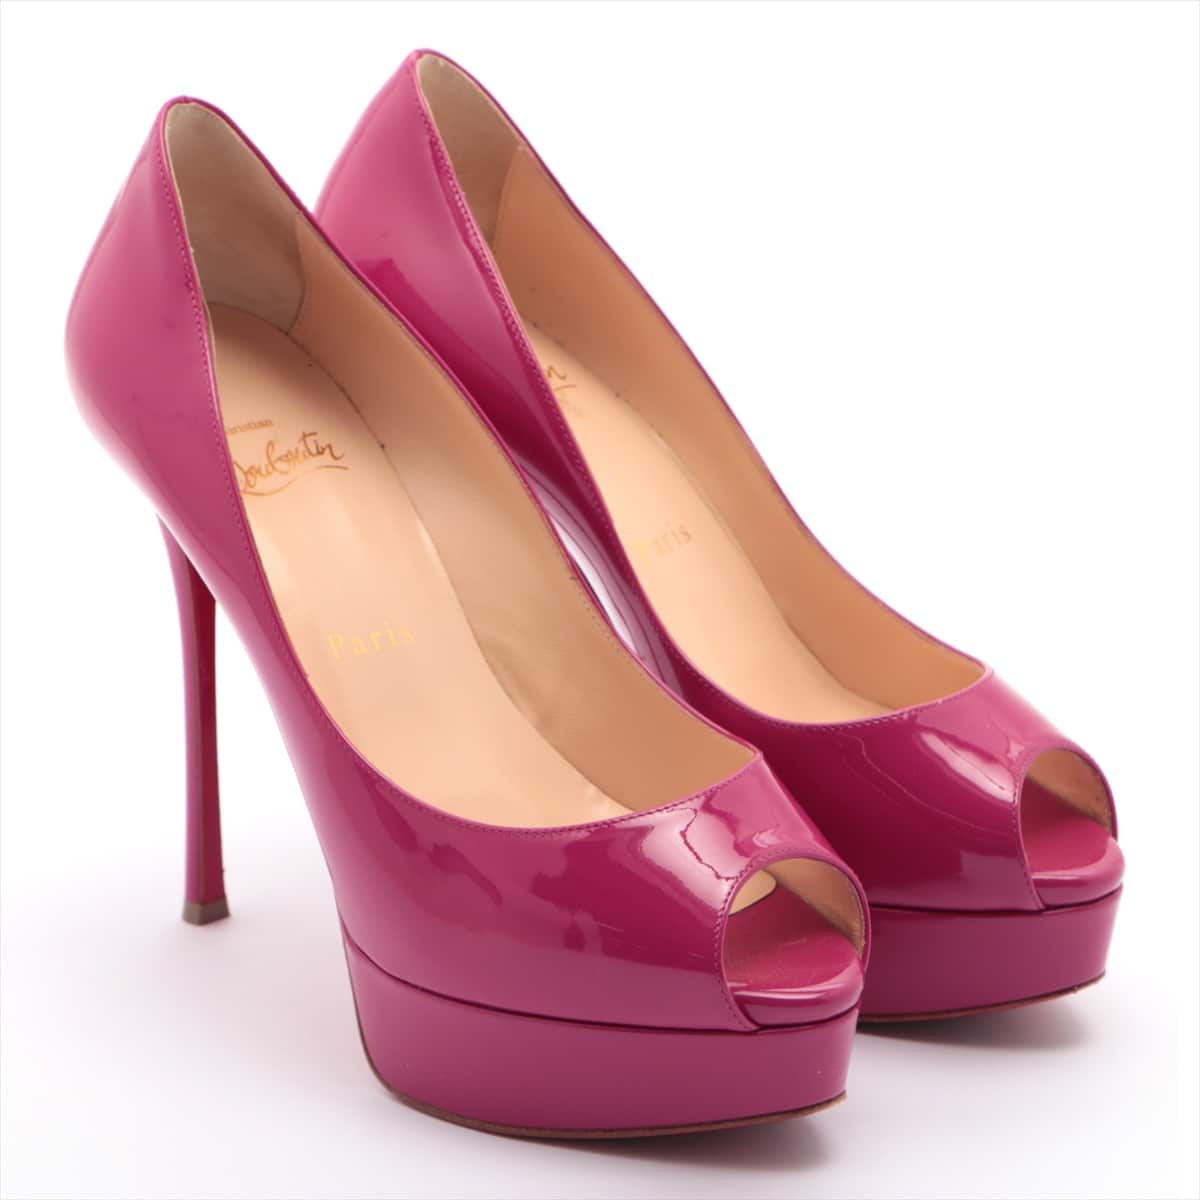 Christian Louboutin Patent leather Open-toe Pumps 37.5 Ladies' Pink